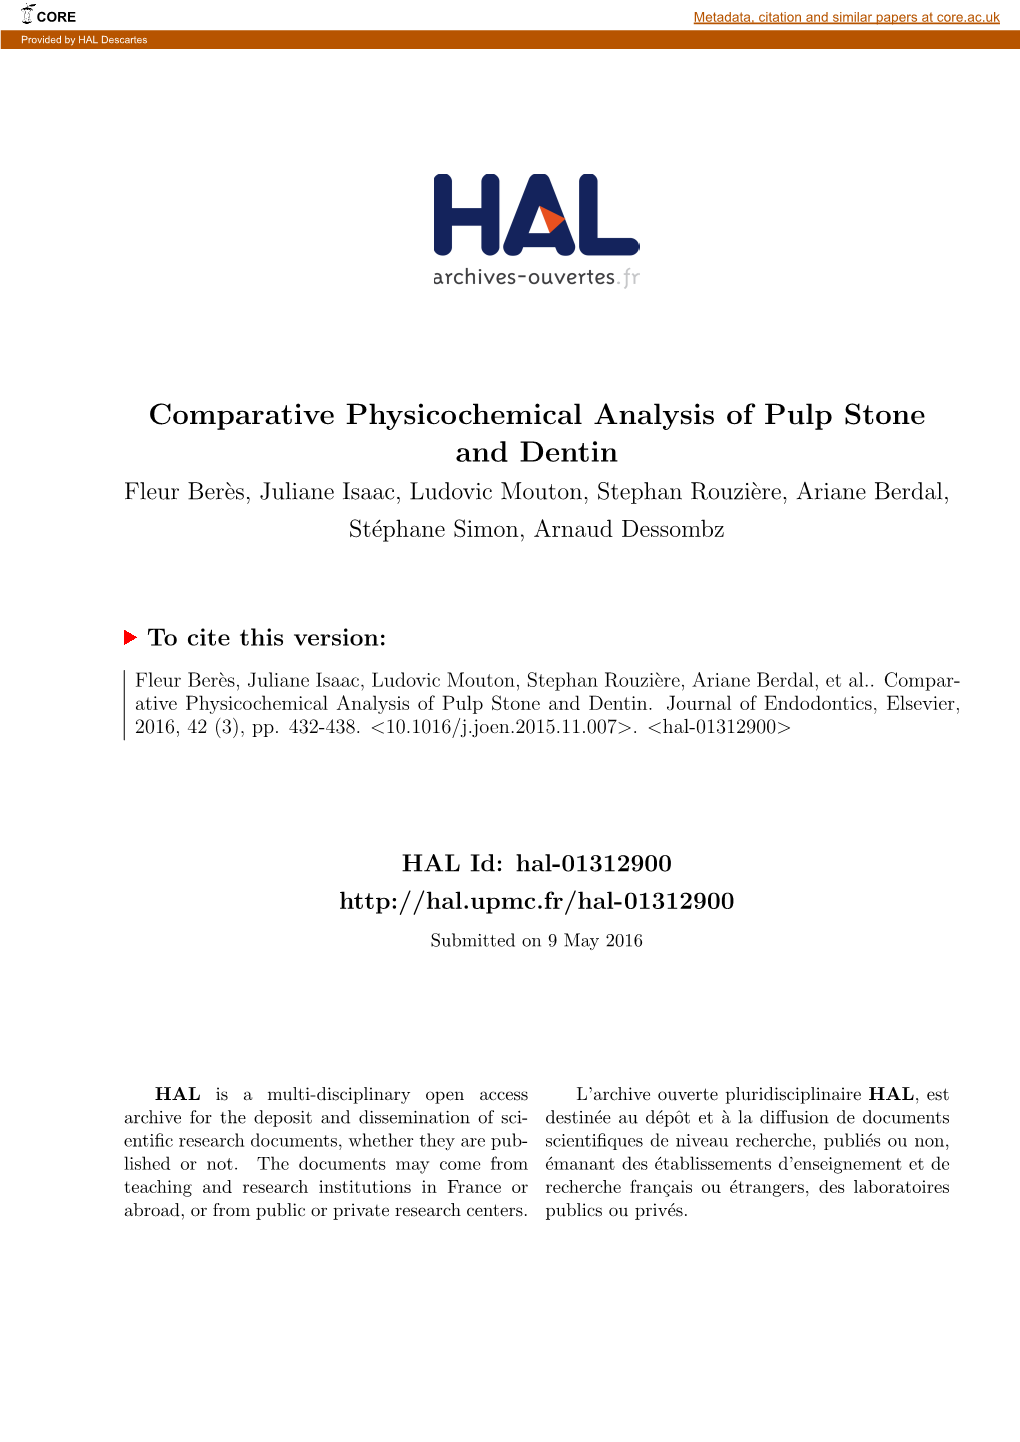 Comparative Physicochemical Analysis of Pulp Stone and Dentin